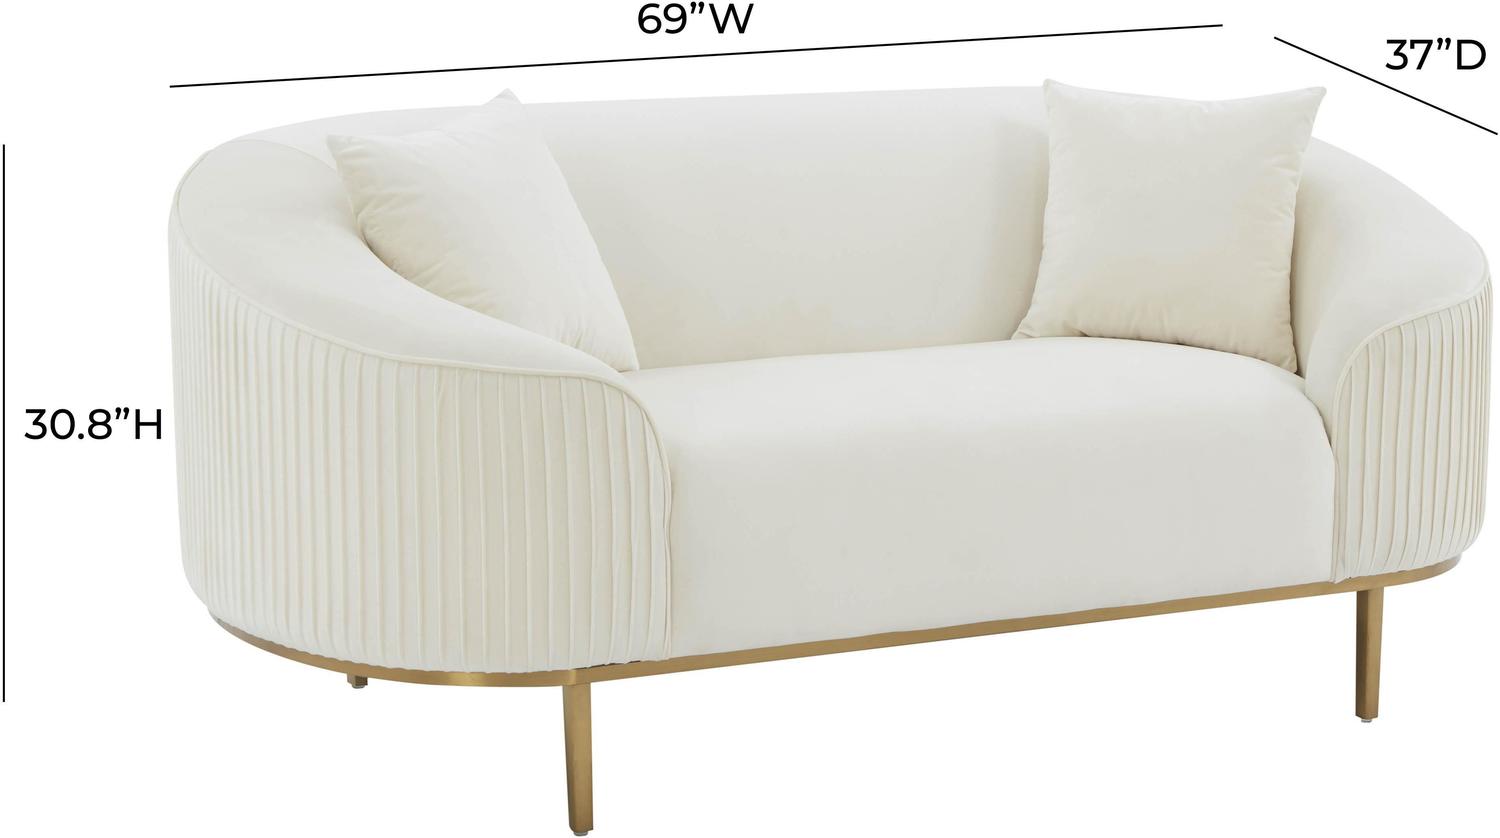 good sectional couches Contemporary Design Furniture Loveseats Cream